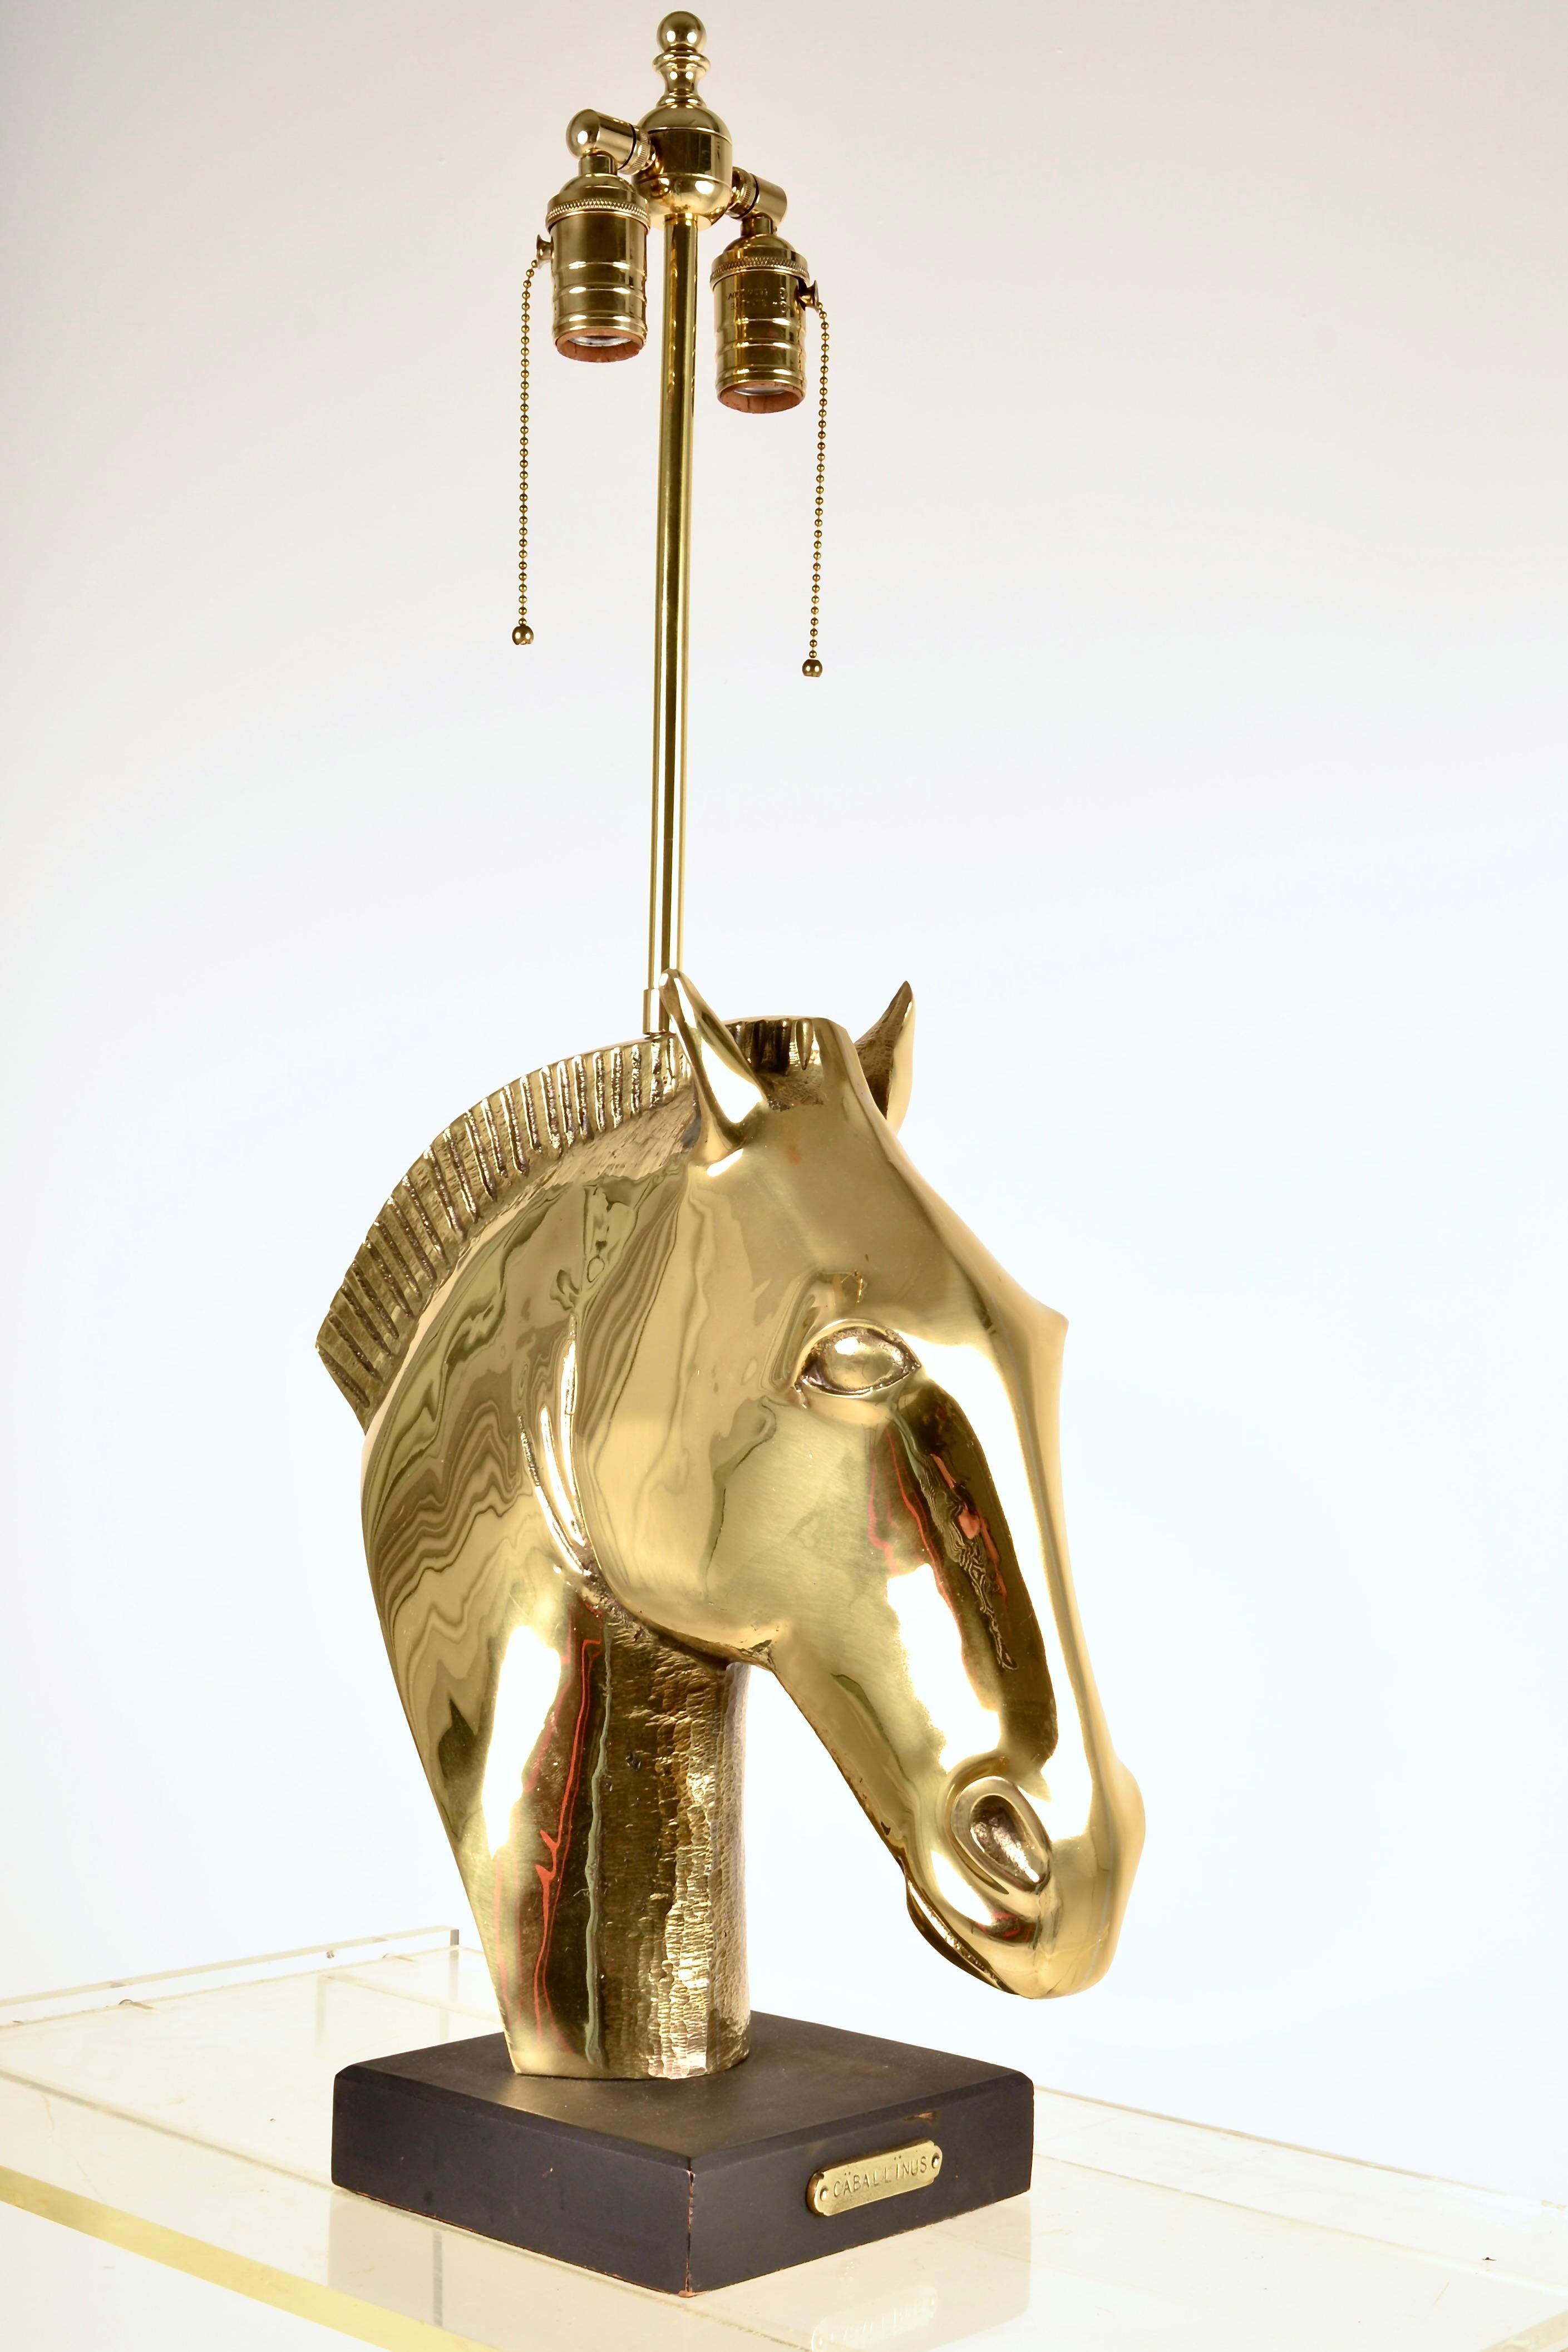 Superb quality lamp featuring a heavy cast brass sculpture of a Roman-style horse head. Brass plaque attached to wooden base is engraved with the word CABALLINUS, horse in latin. Very fine lamp conversion, also in brass with new wiring. The brass